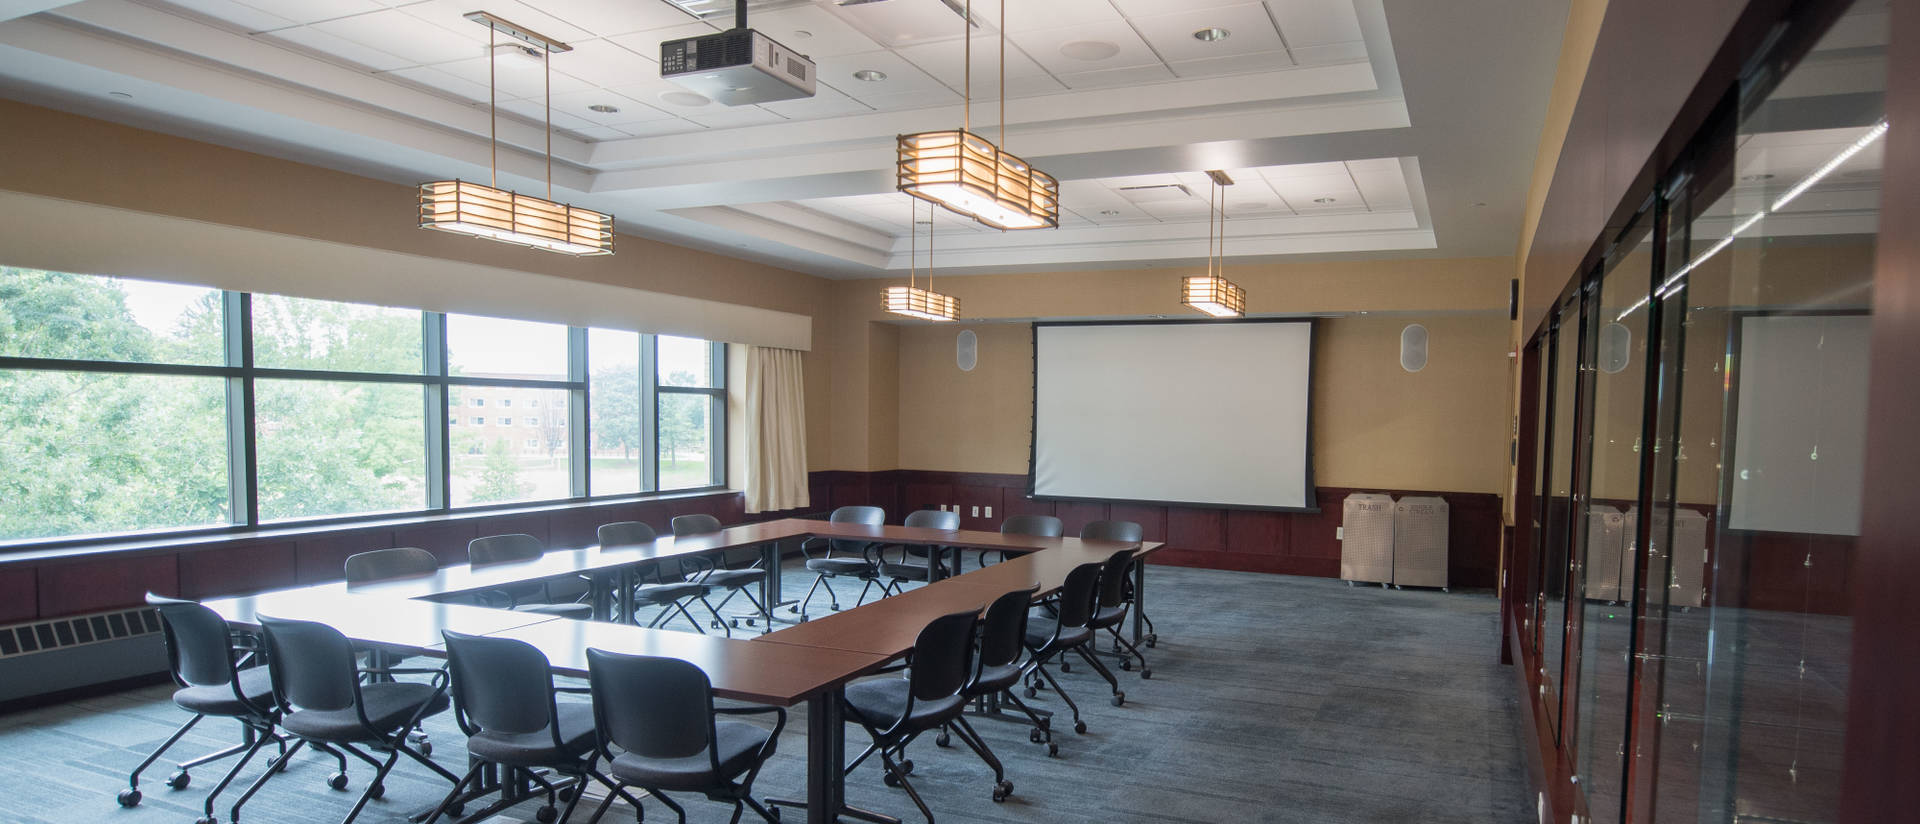 Council Oak conference room in Davies Center